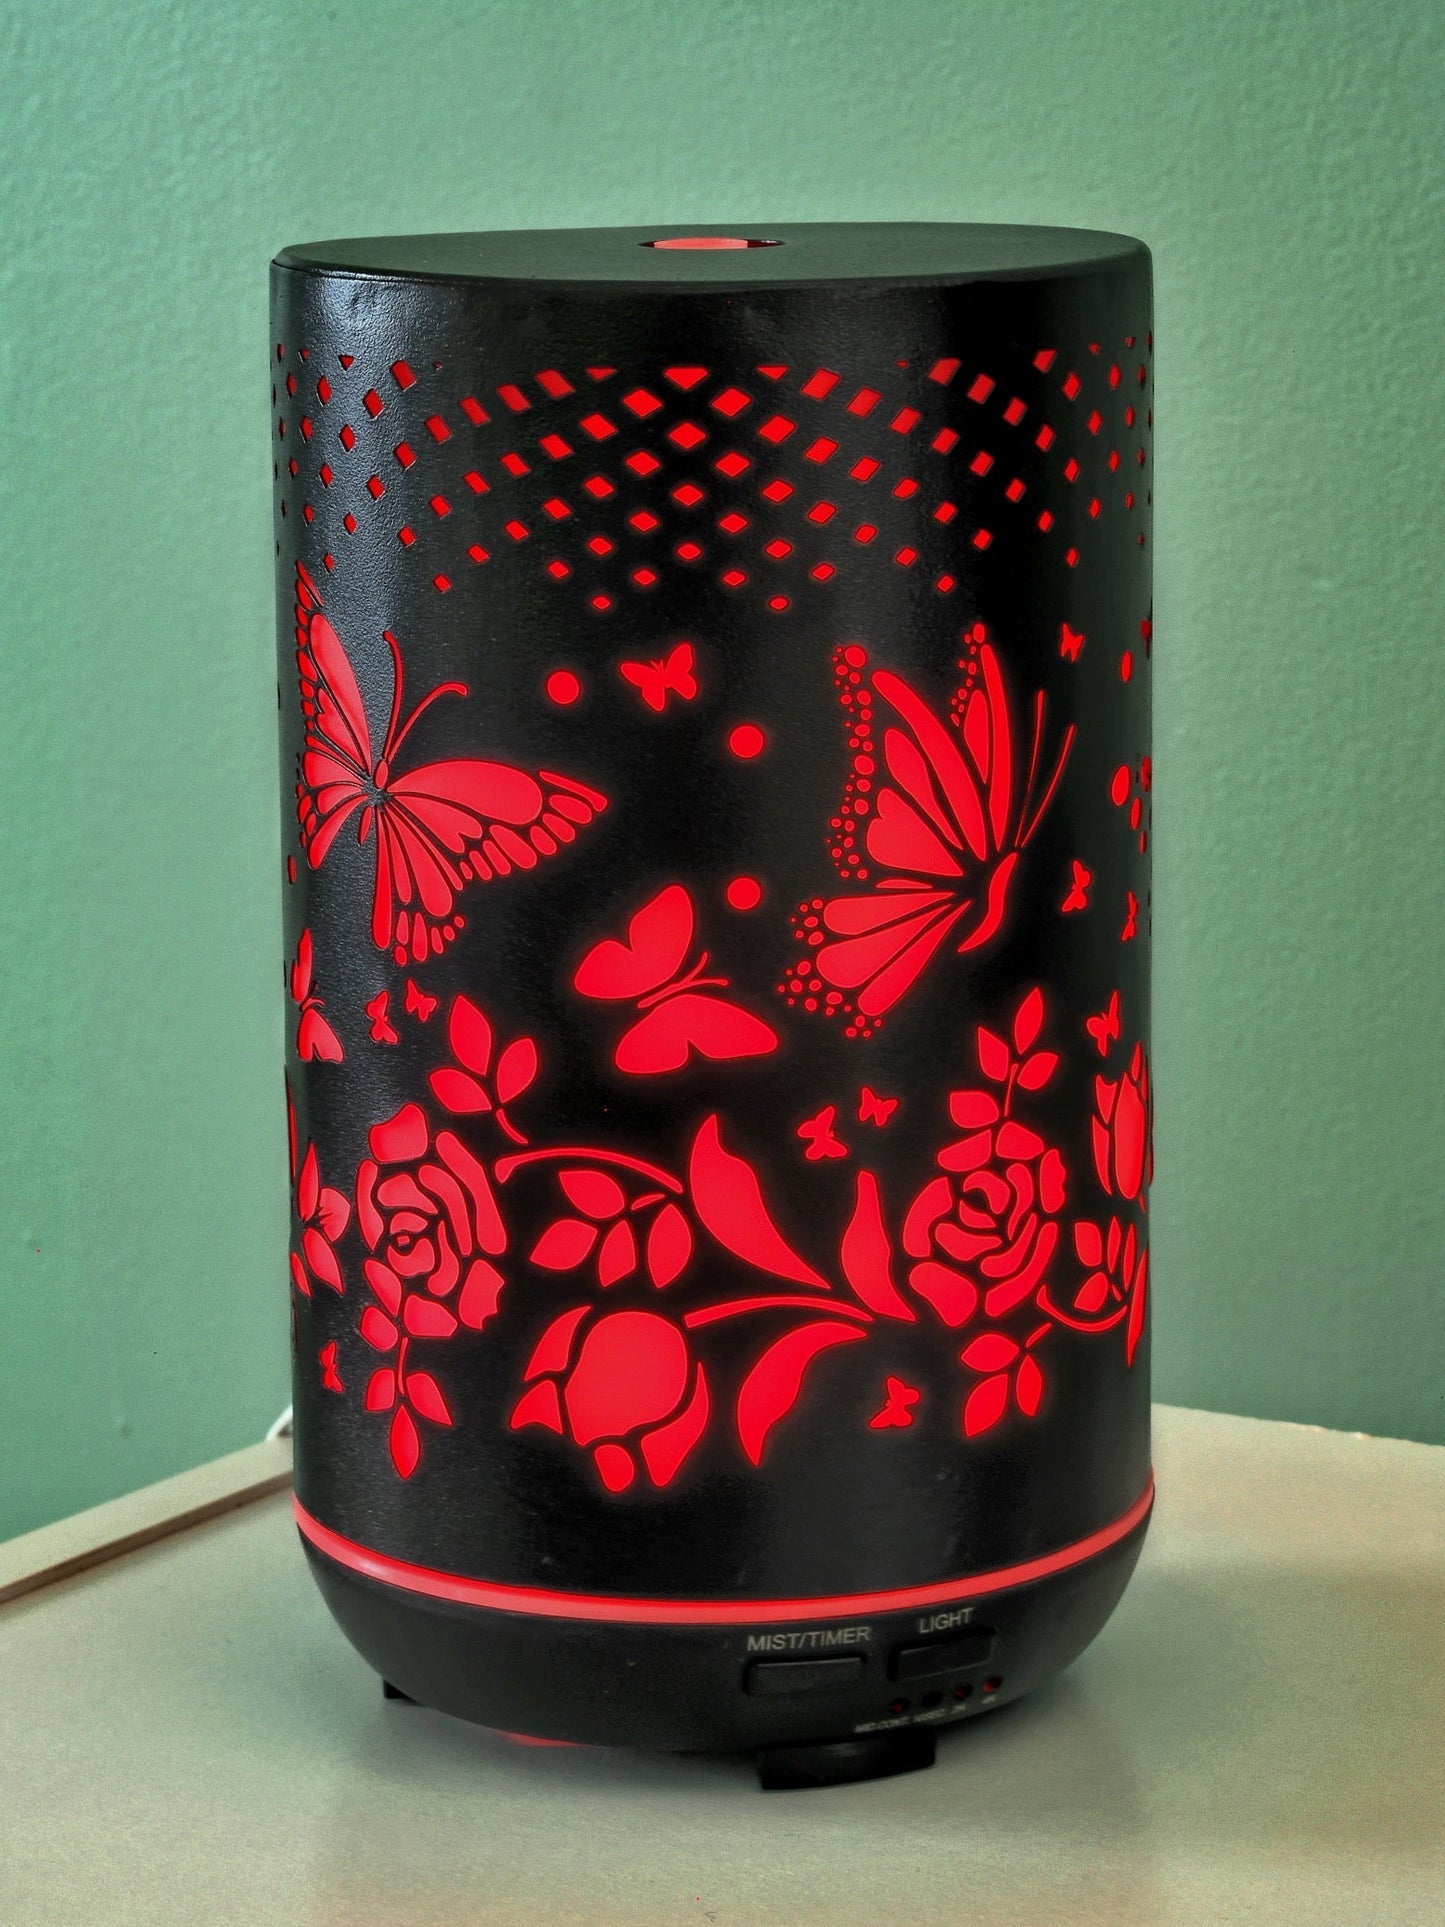 Elegant Flower Aroma Diffuser for Relaxing Aromatherapy by Ancient Infusions.